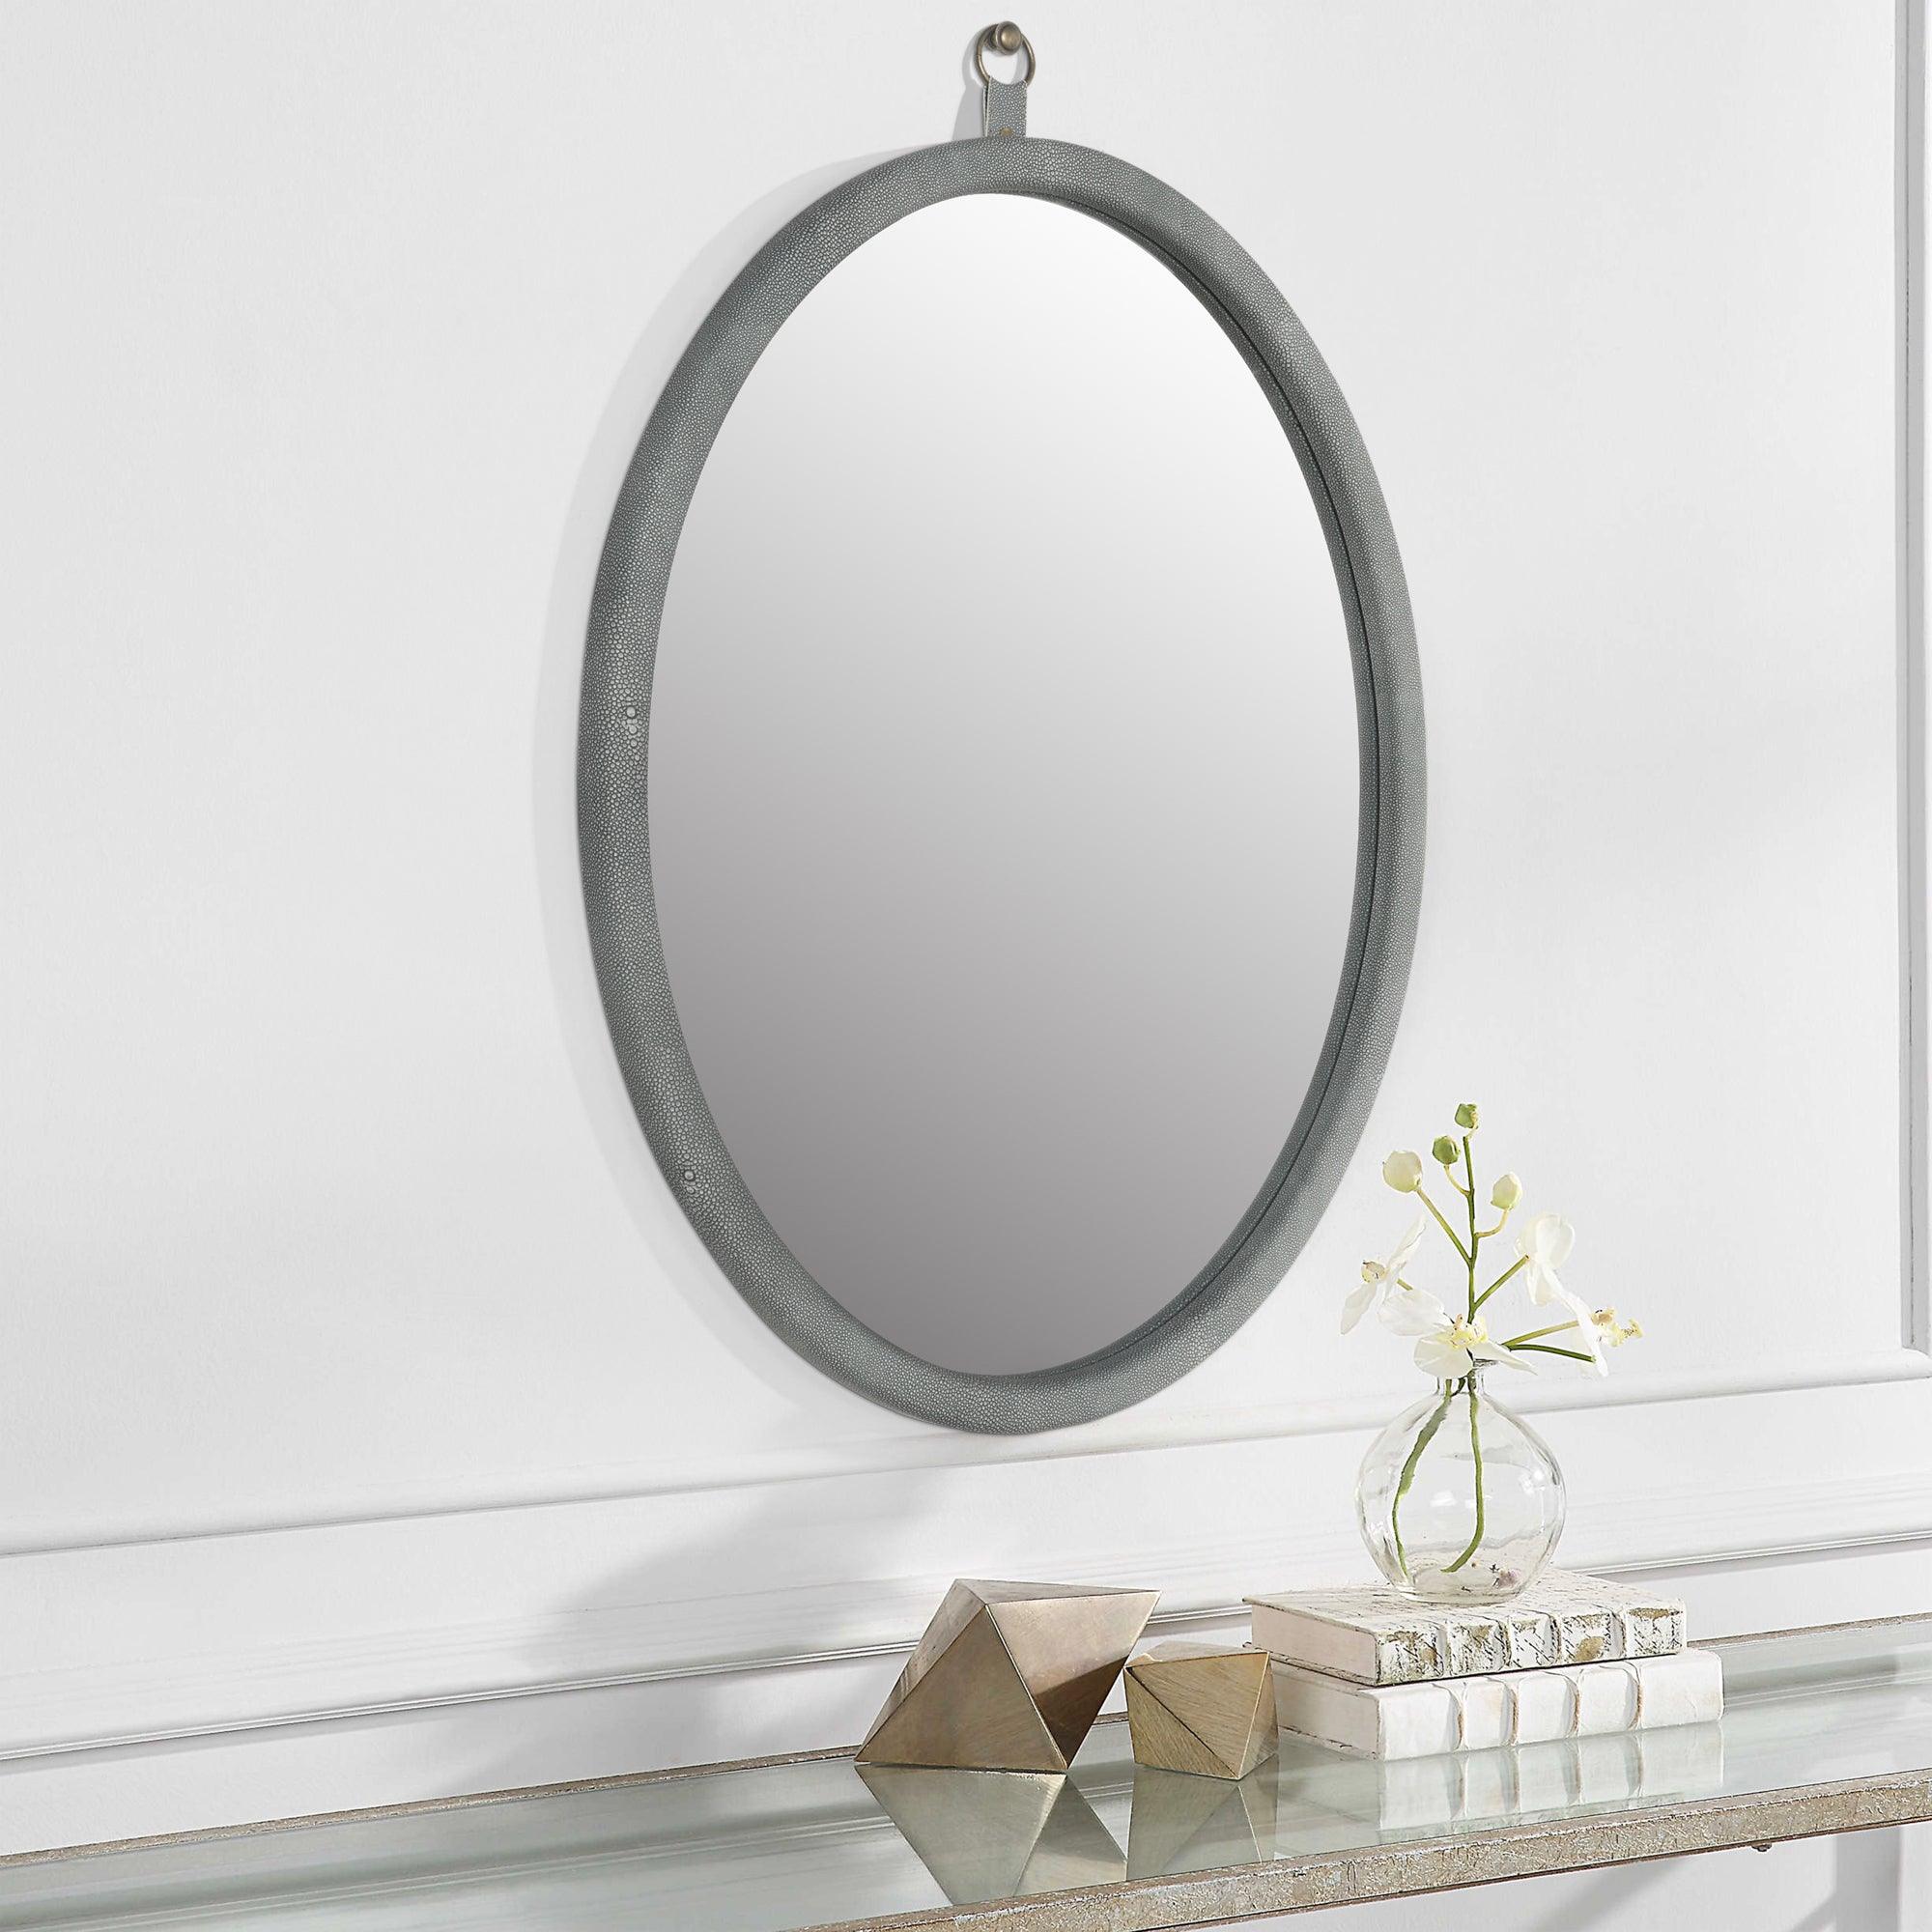 🆓🚛 Oval Shagreen Decorative Wall Hanging Mirror, Pu Covered Mdf Framed Mirror for Bedroom Living Room Vanity Entryway Wall Decor, 23.62X29.92"